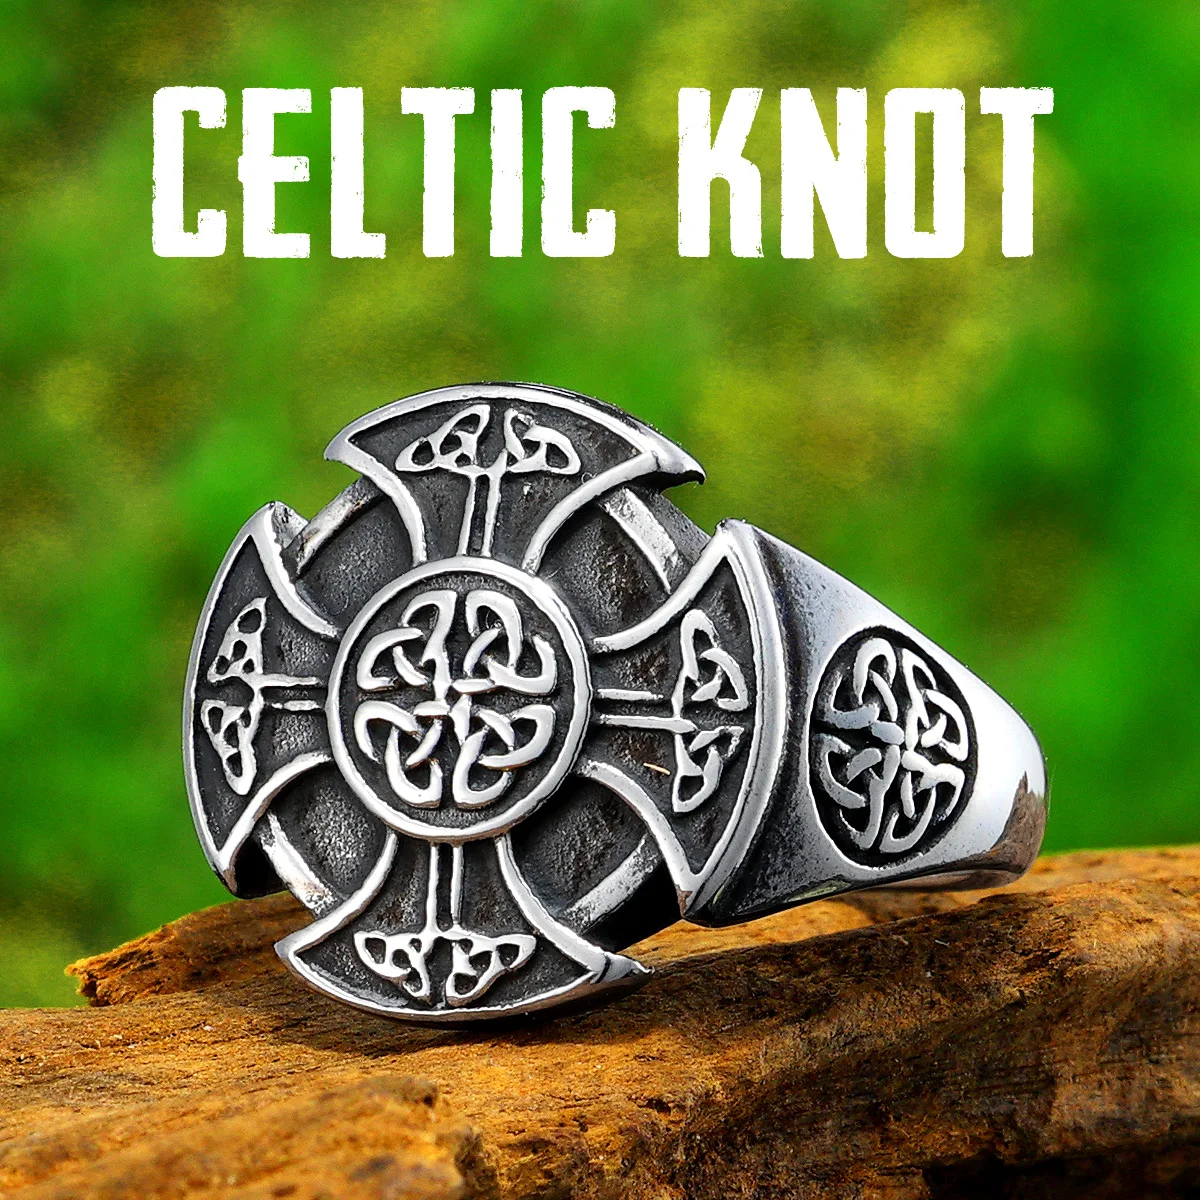 

Celtic Knot Viking Cross Men Rings Stainless Steel Jewelry Punk Rock Cool Stuff Fashion Accessories For Women Gift Wholesale